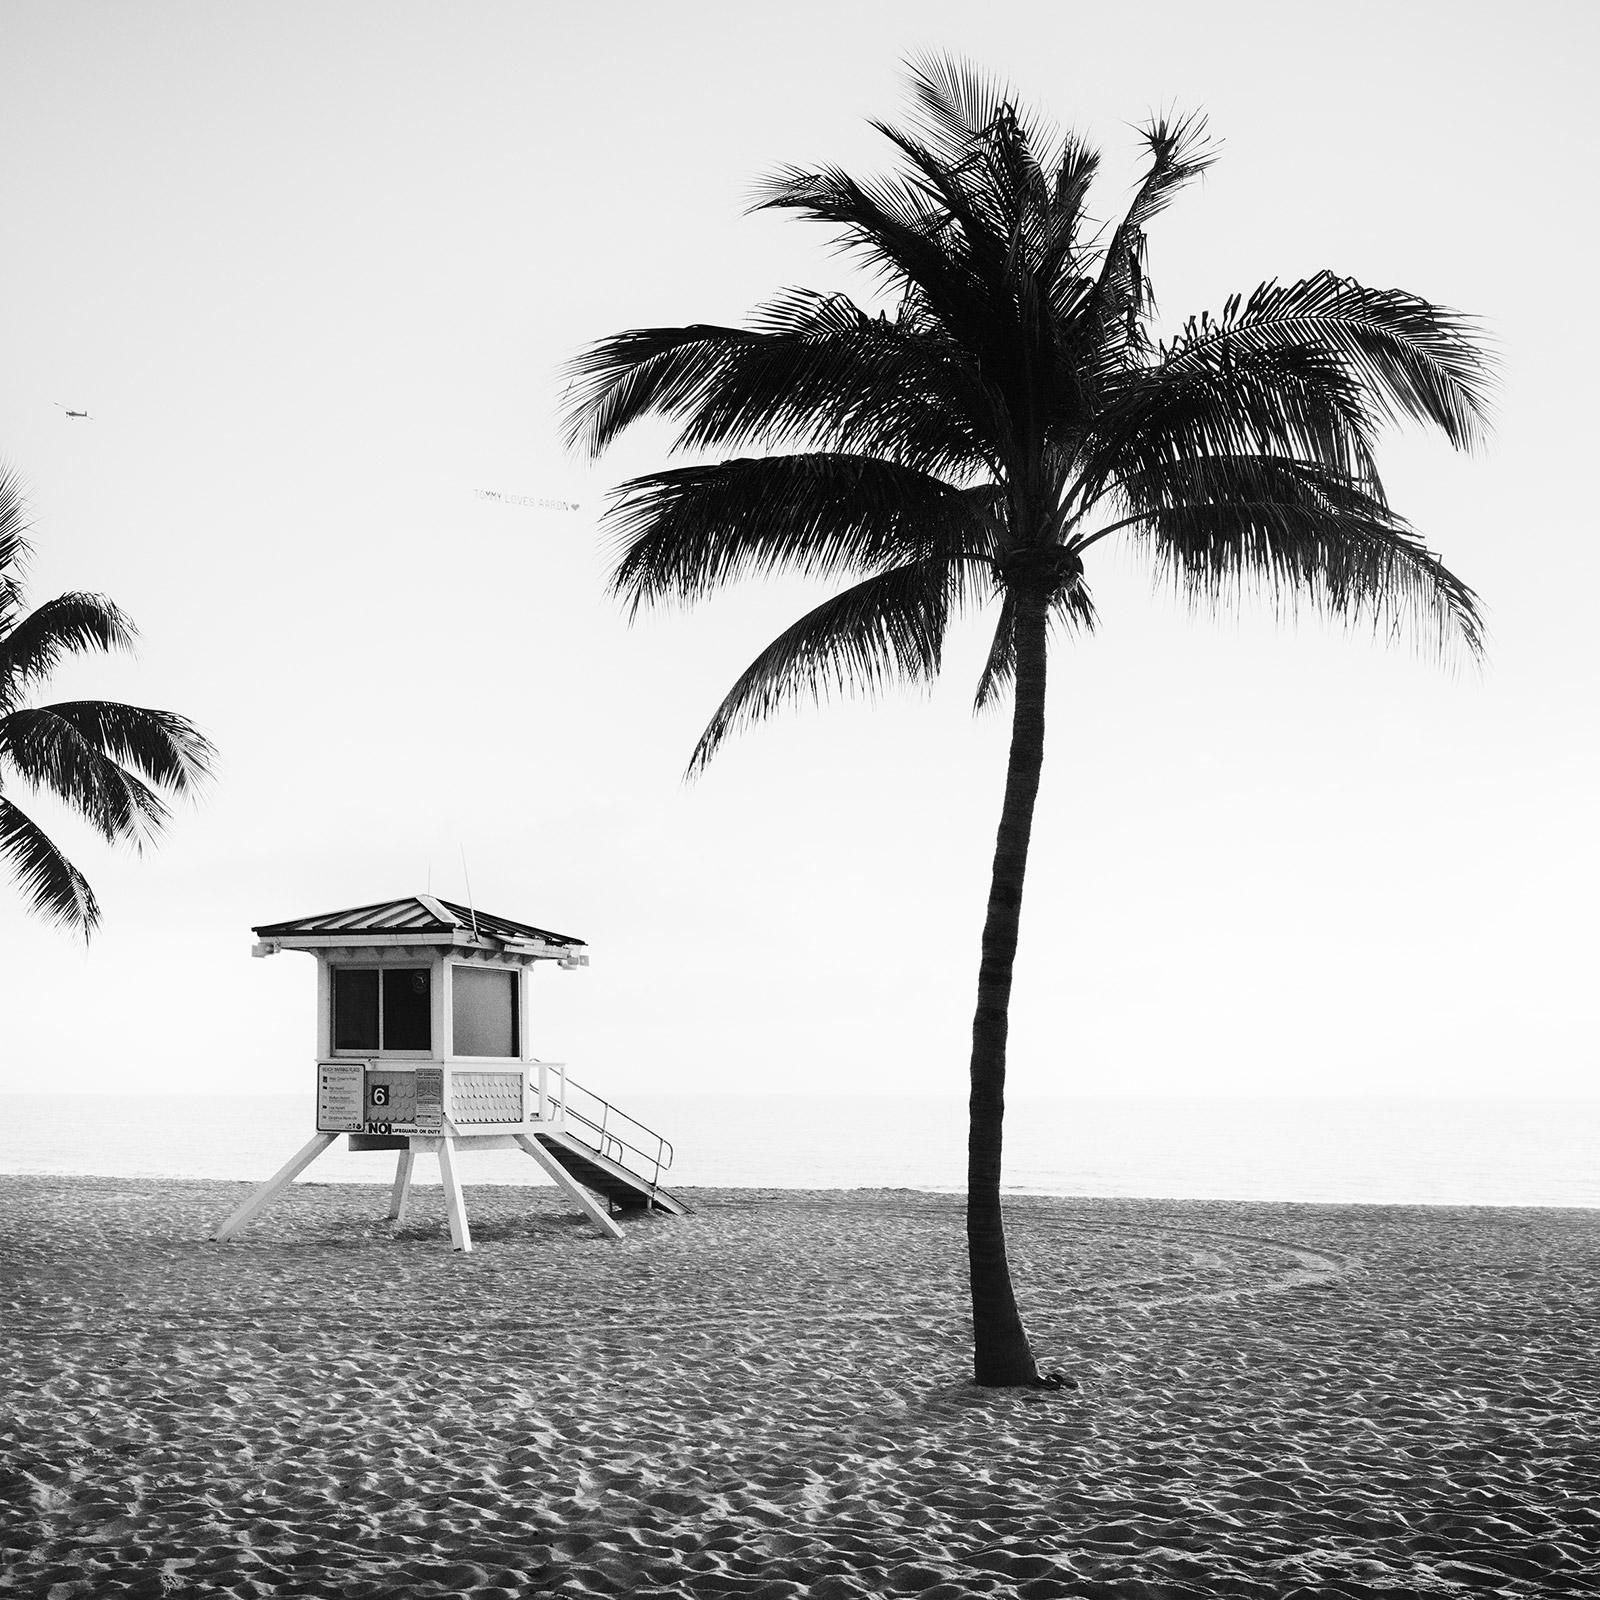 Gerald Berghammer Landscape Photograph - Tommy loves Aaron, beach, Florida, USA, black and white photography, landscape